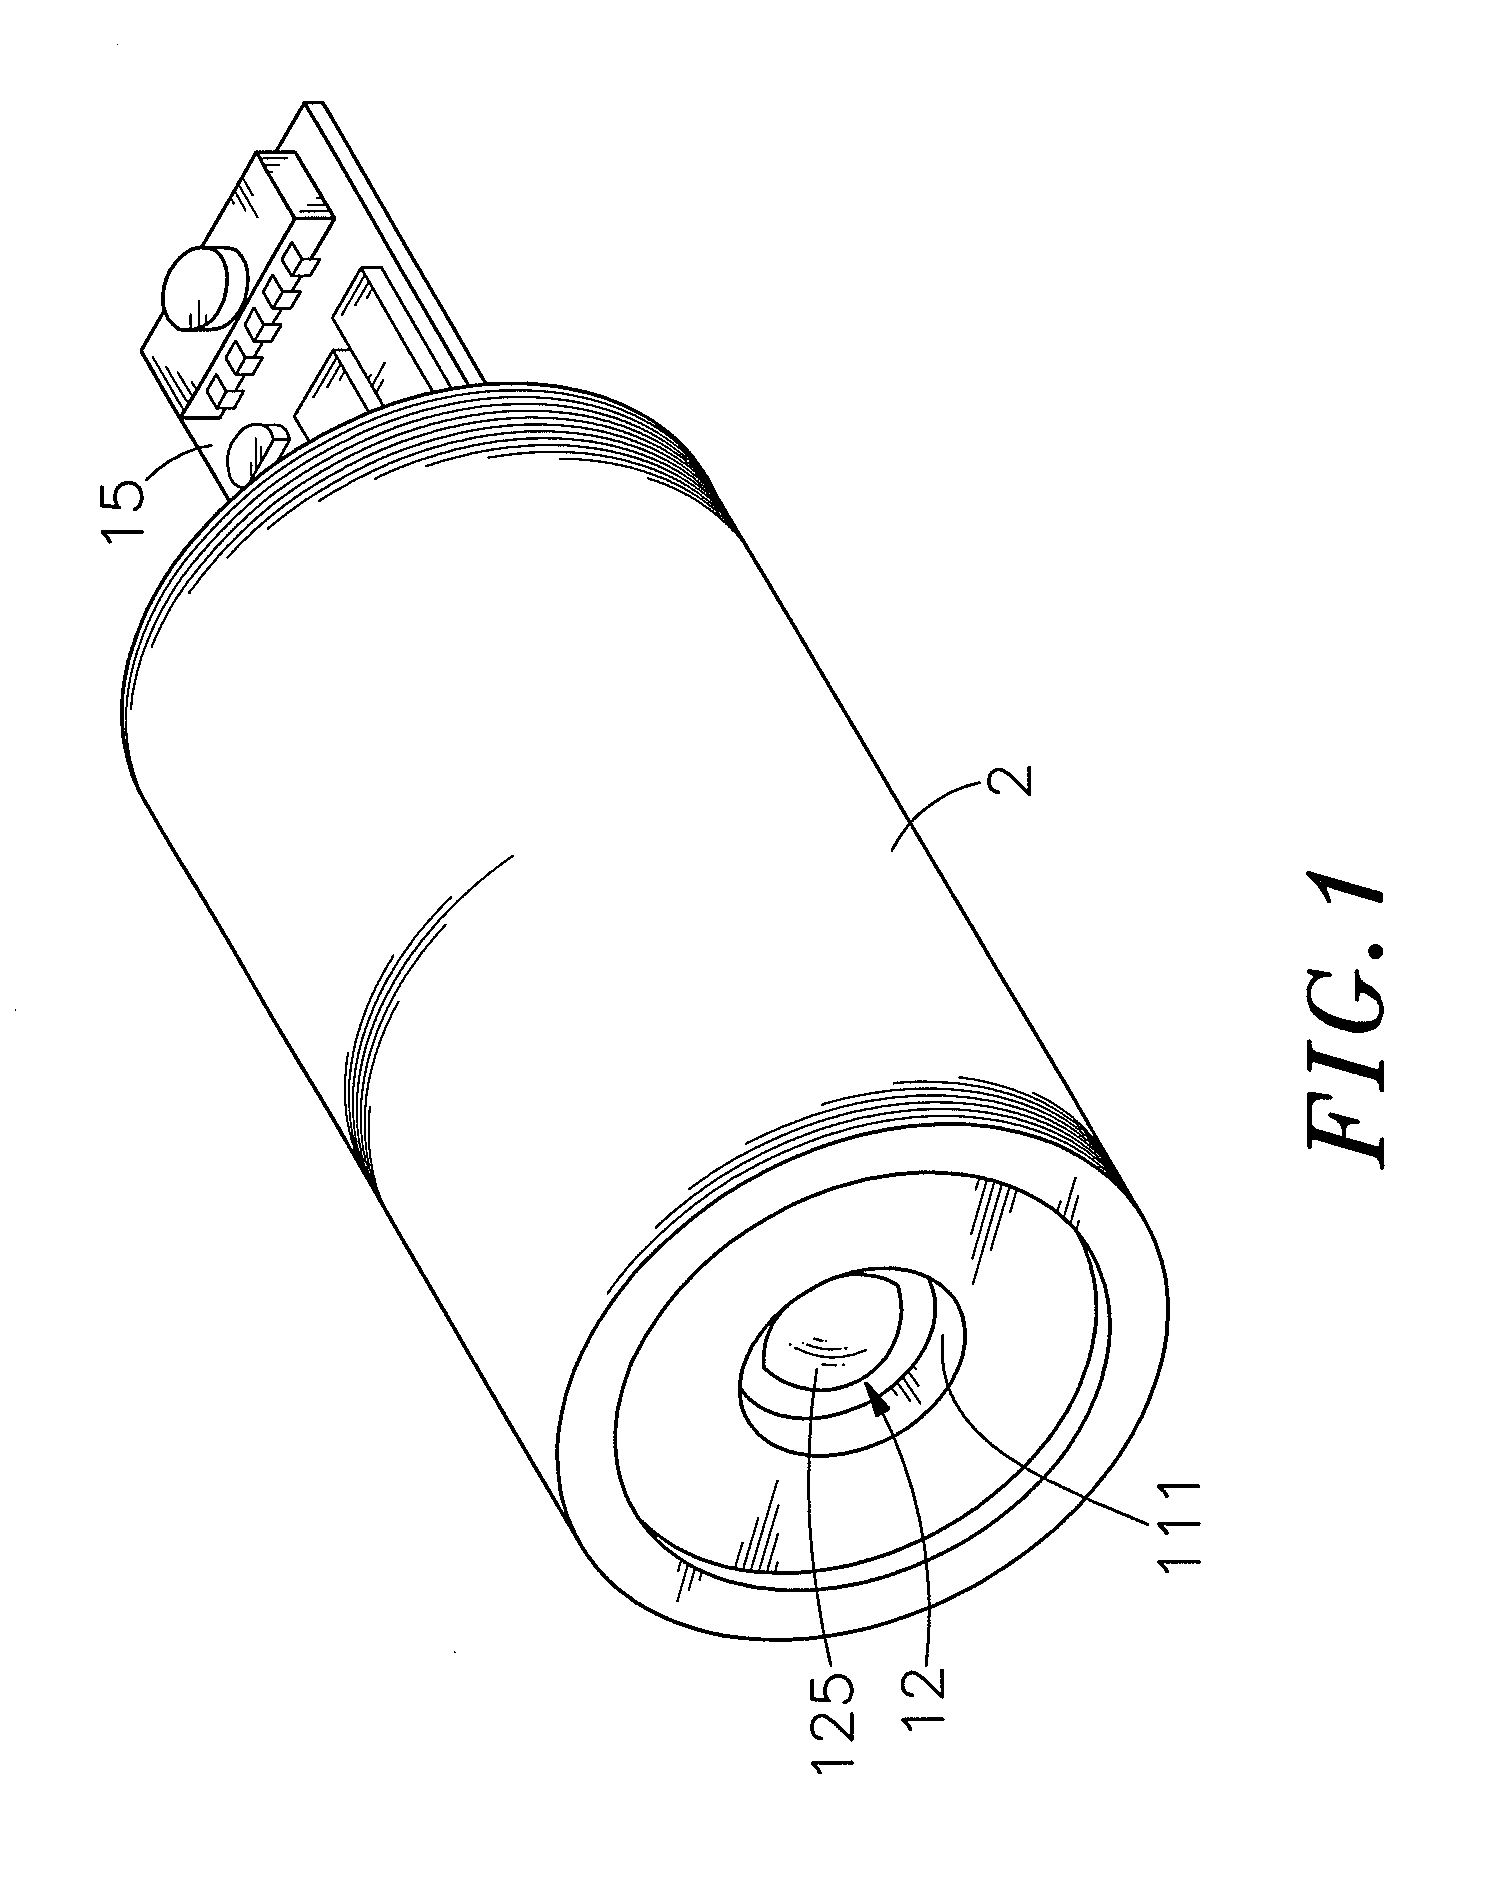 Laser module co-axis adjustment structure